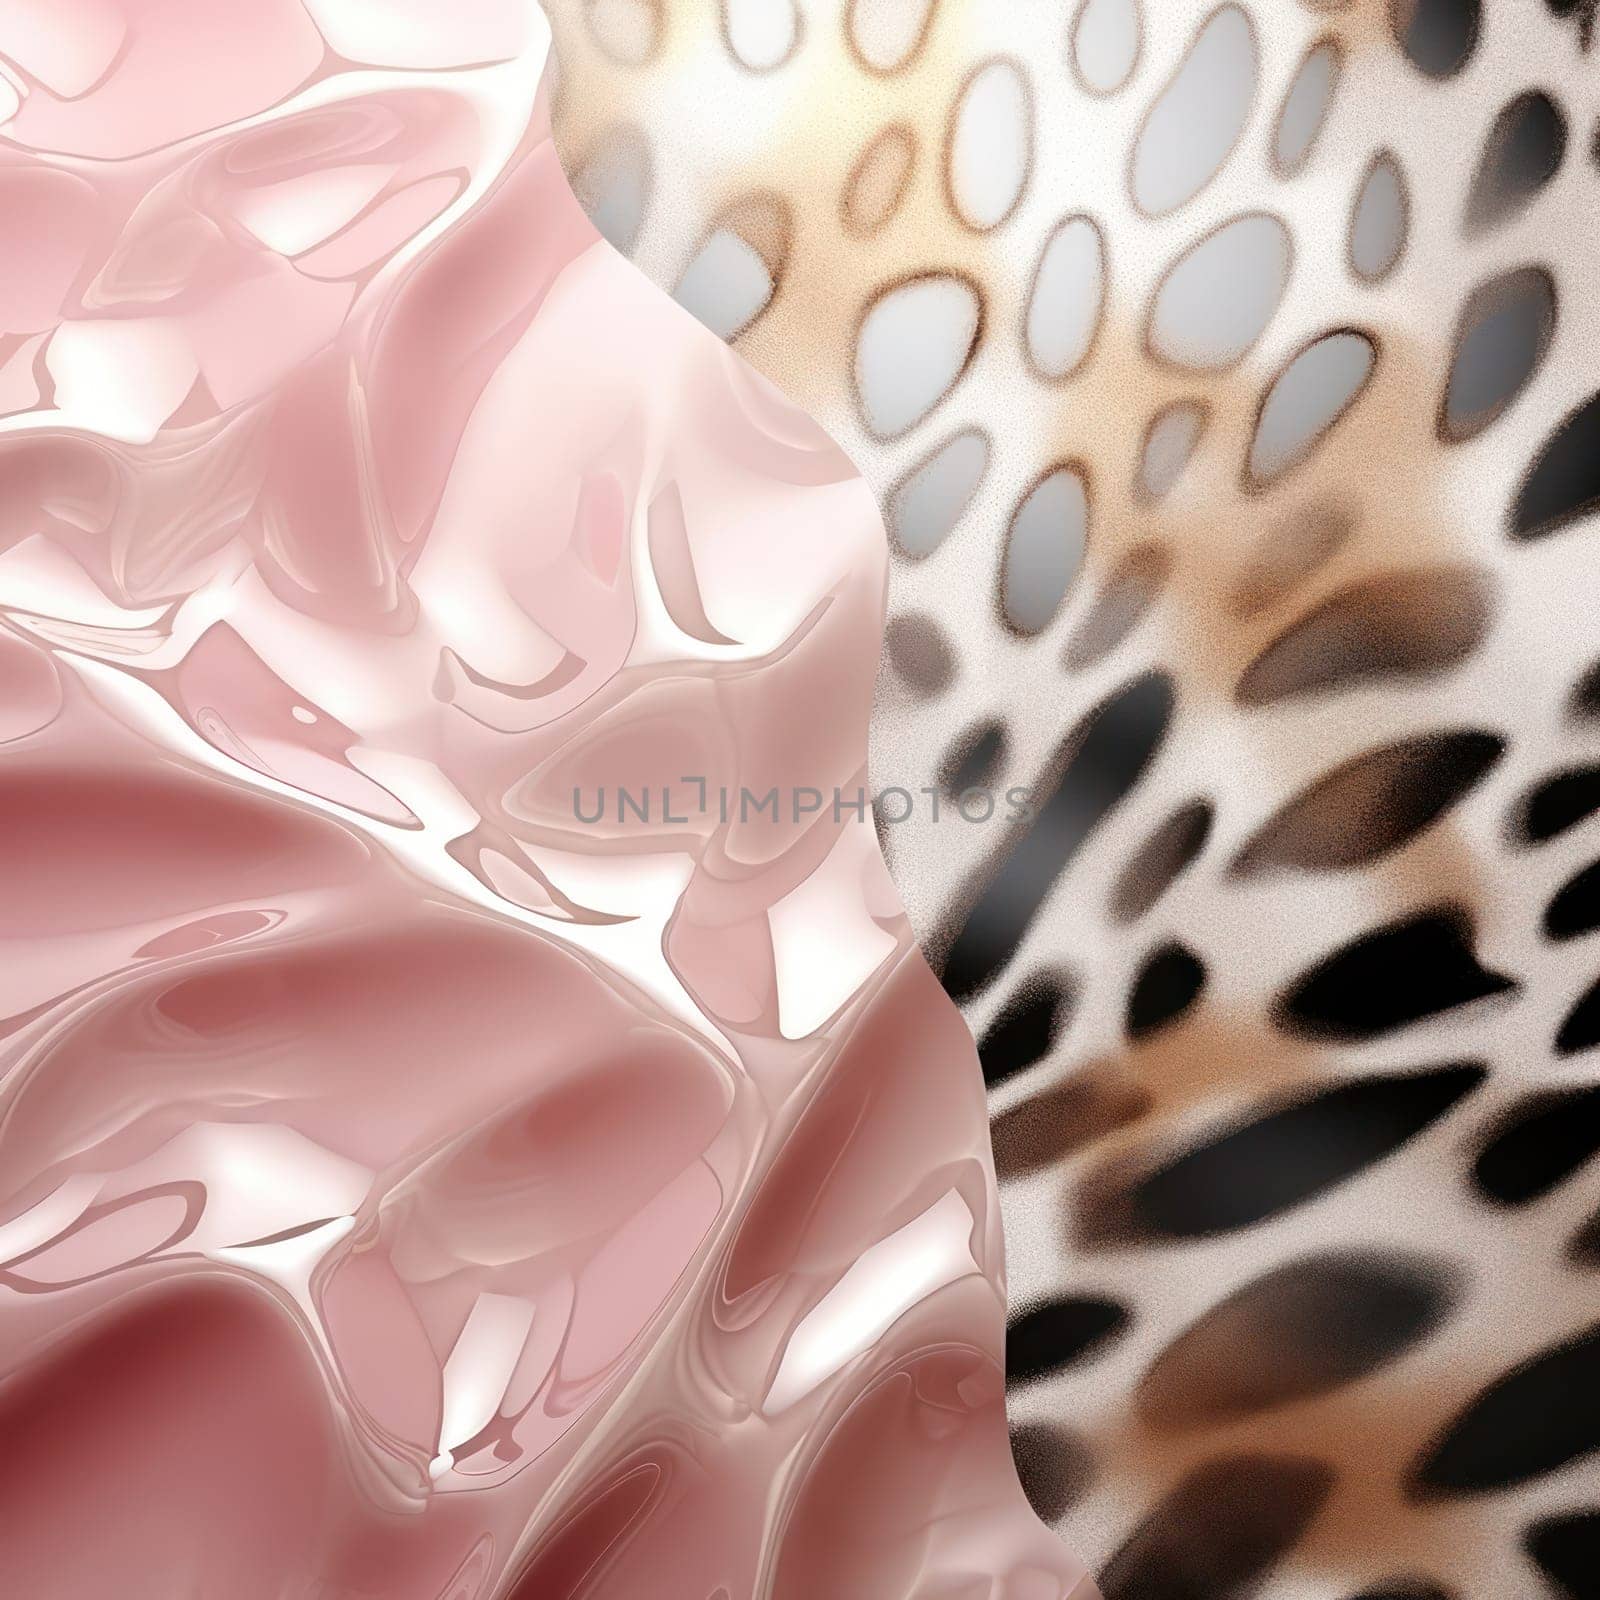 Abstract Pink Wave: A Colorful Gradient of Smooth Patterns on a White Background